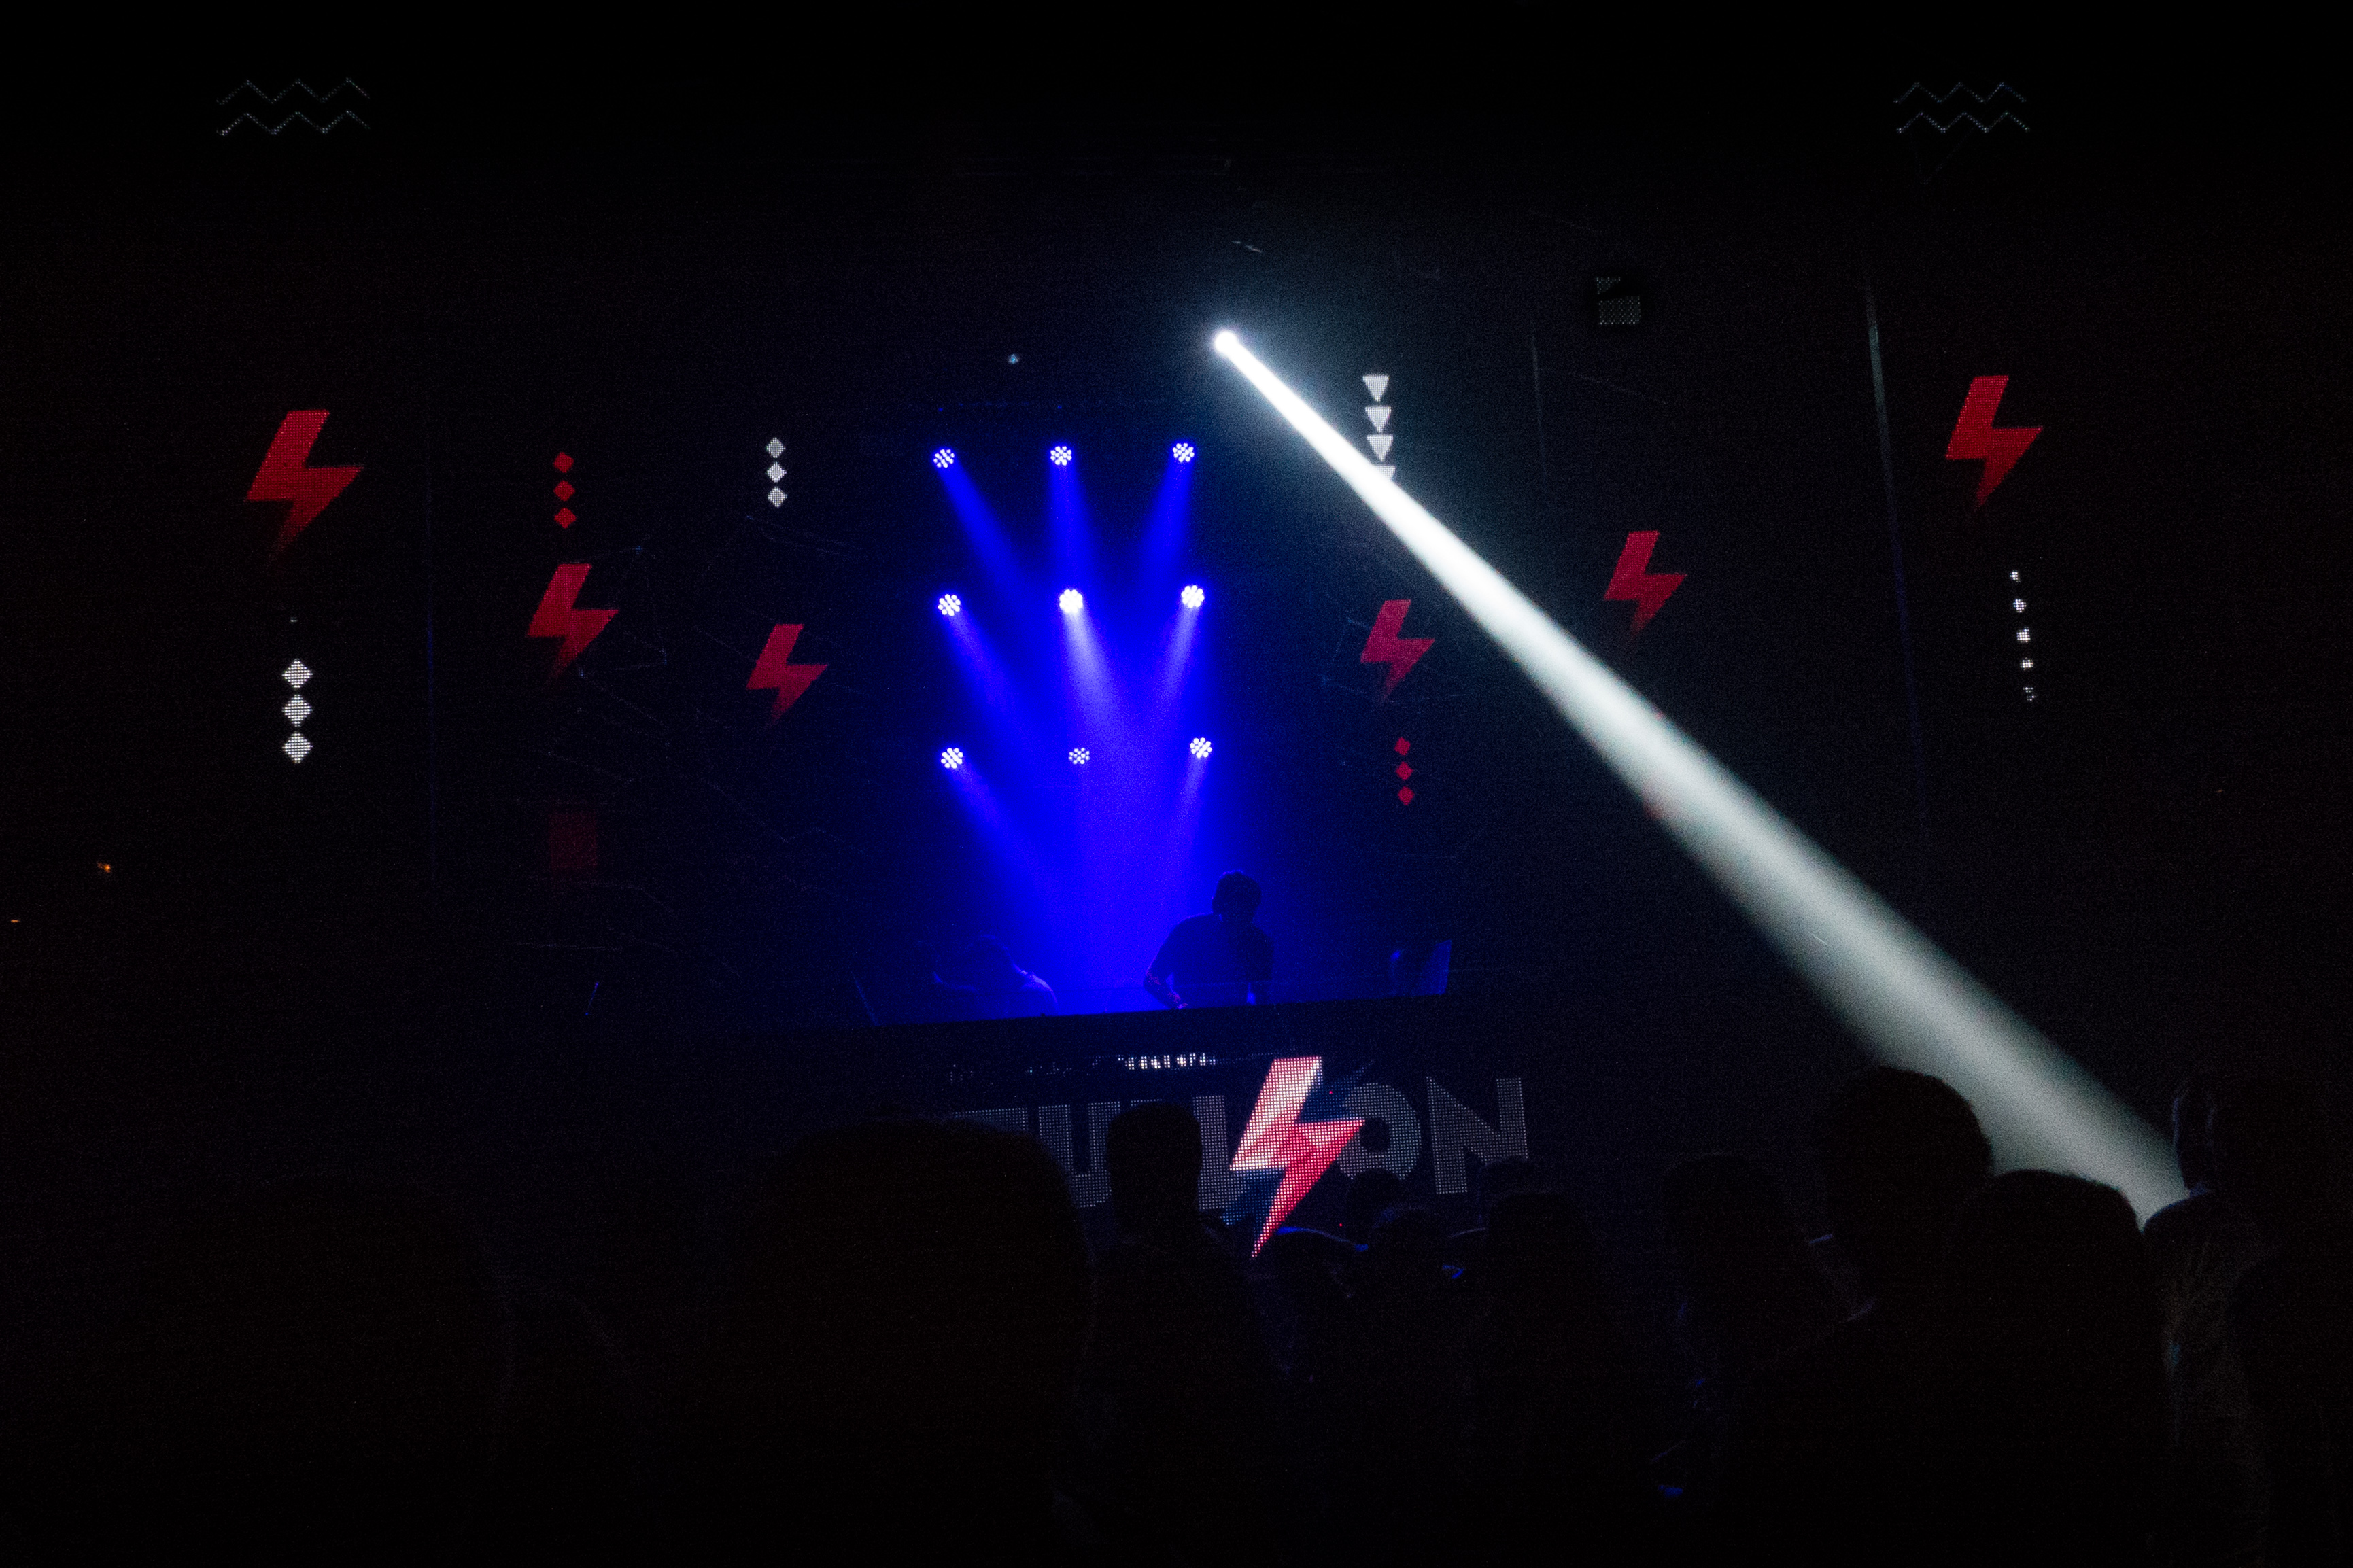 Photo in a very dark nightclub, with white and blue spotlights, red lights in the shape of lightning, and a DJ silhouette at the decks